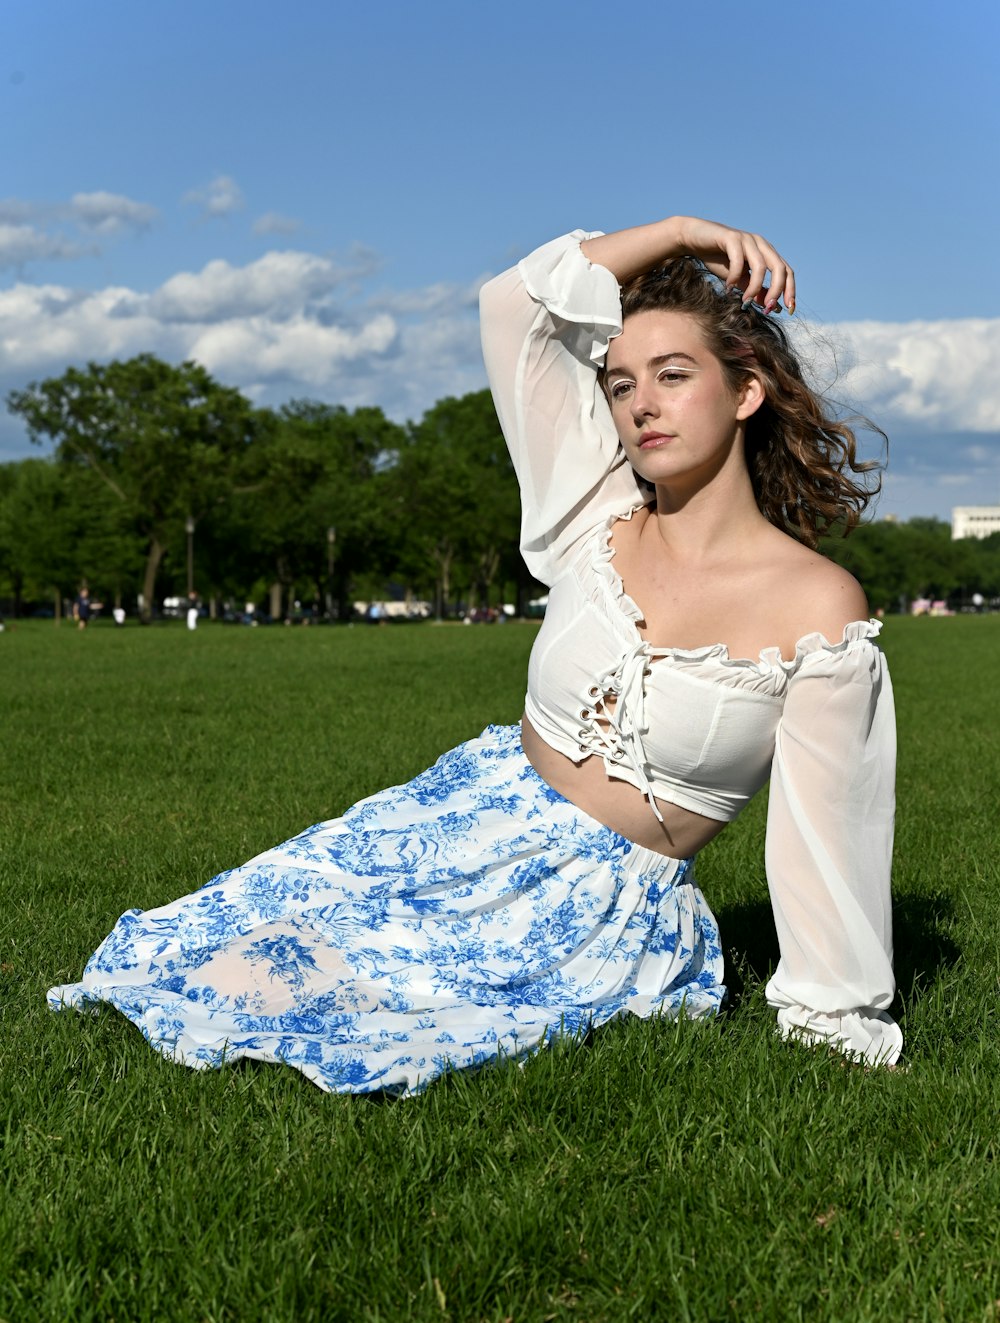 woman in white and blue floral dress lying on green grass field under blue sky during